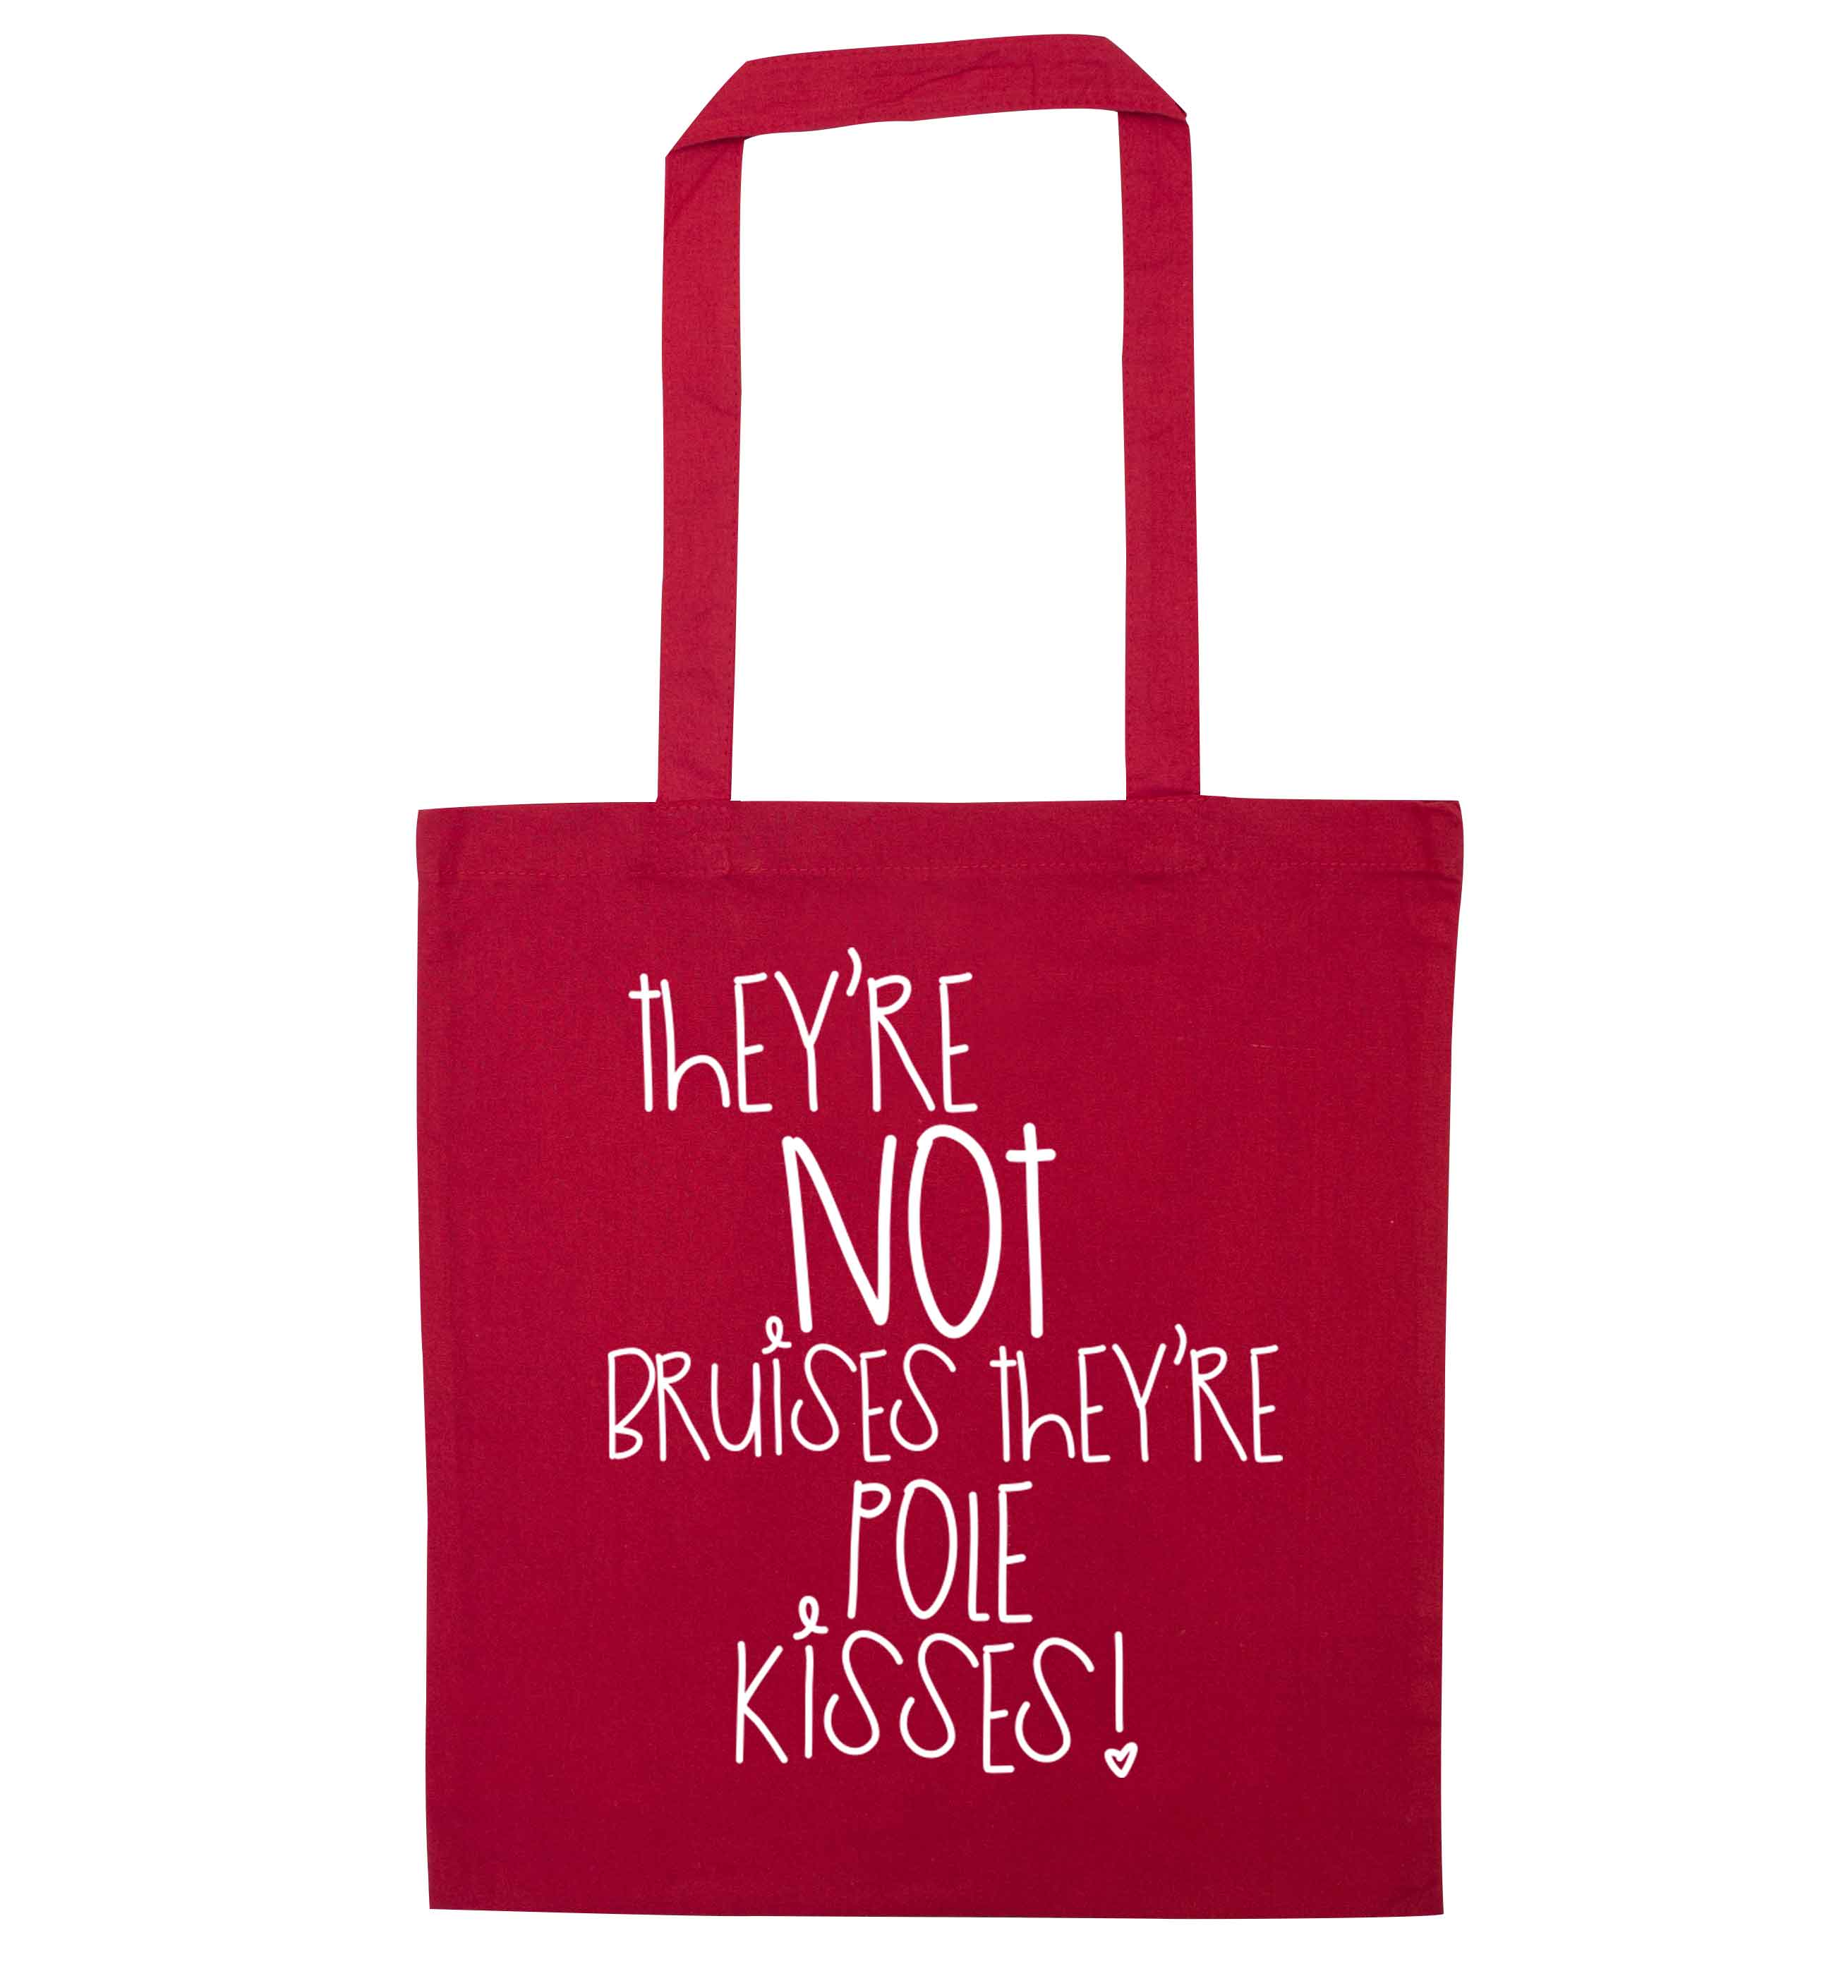 They're not bruises they're pole kisses - Tote Bag | Flox Creative